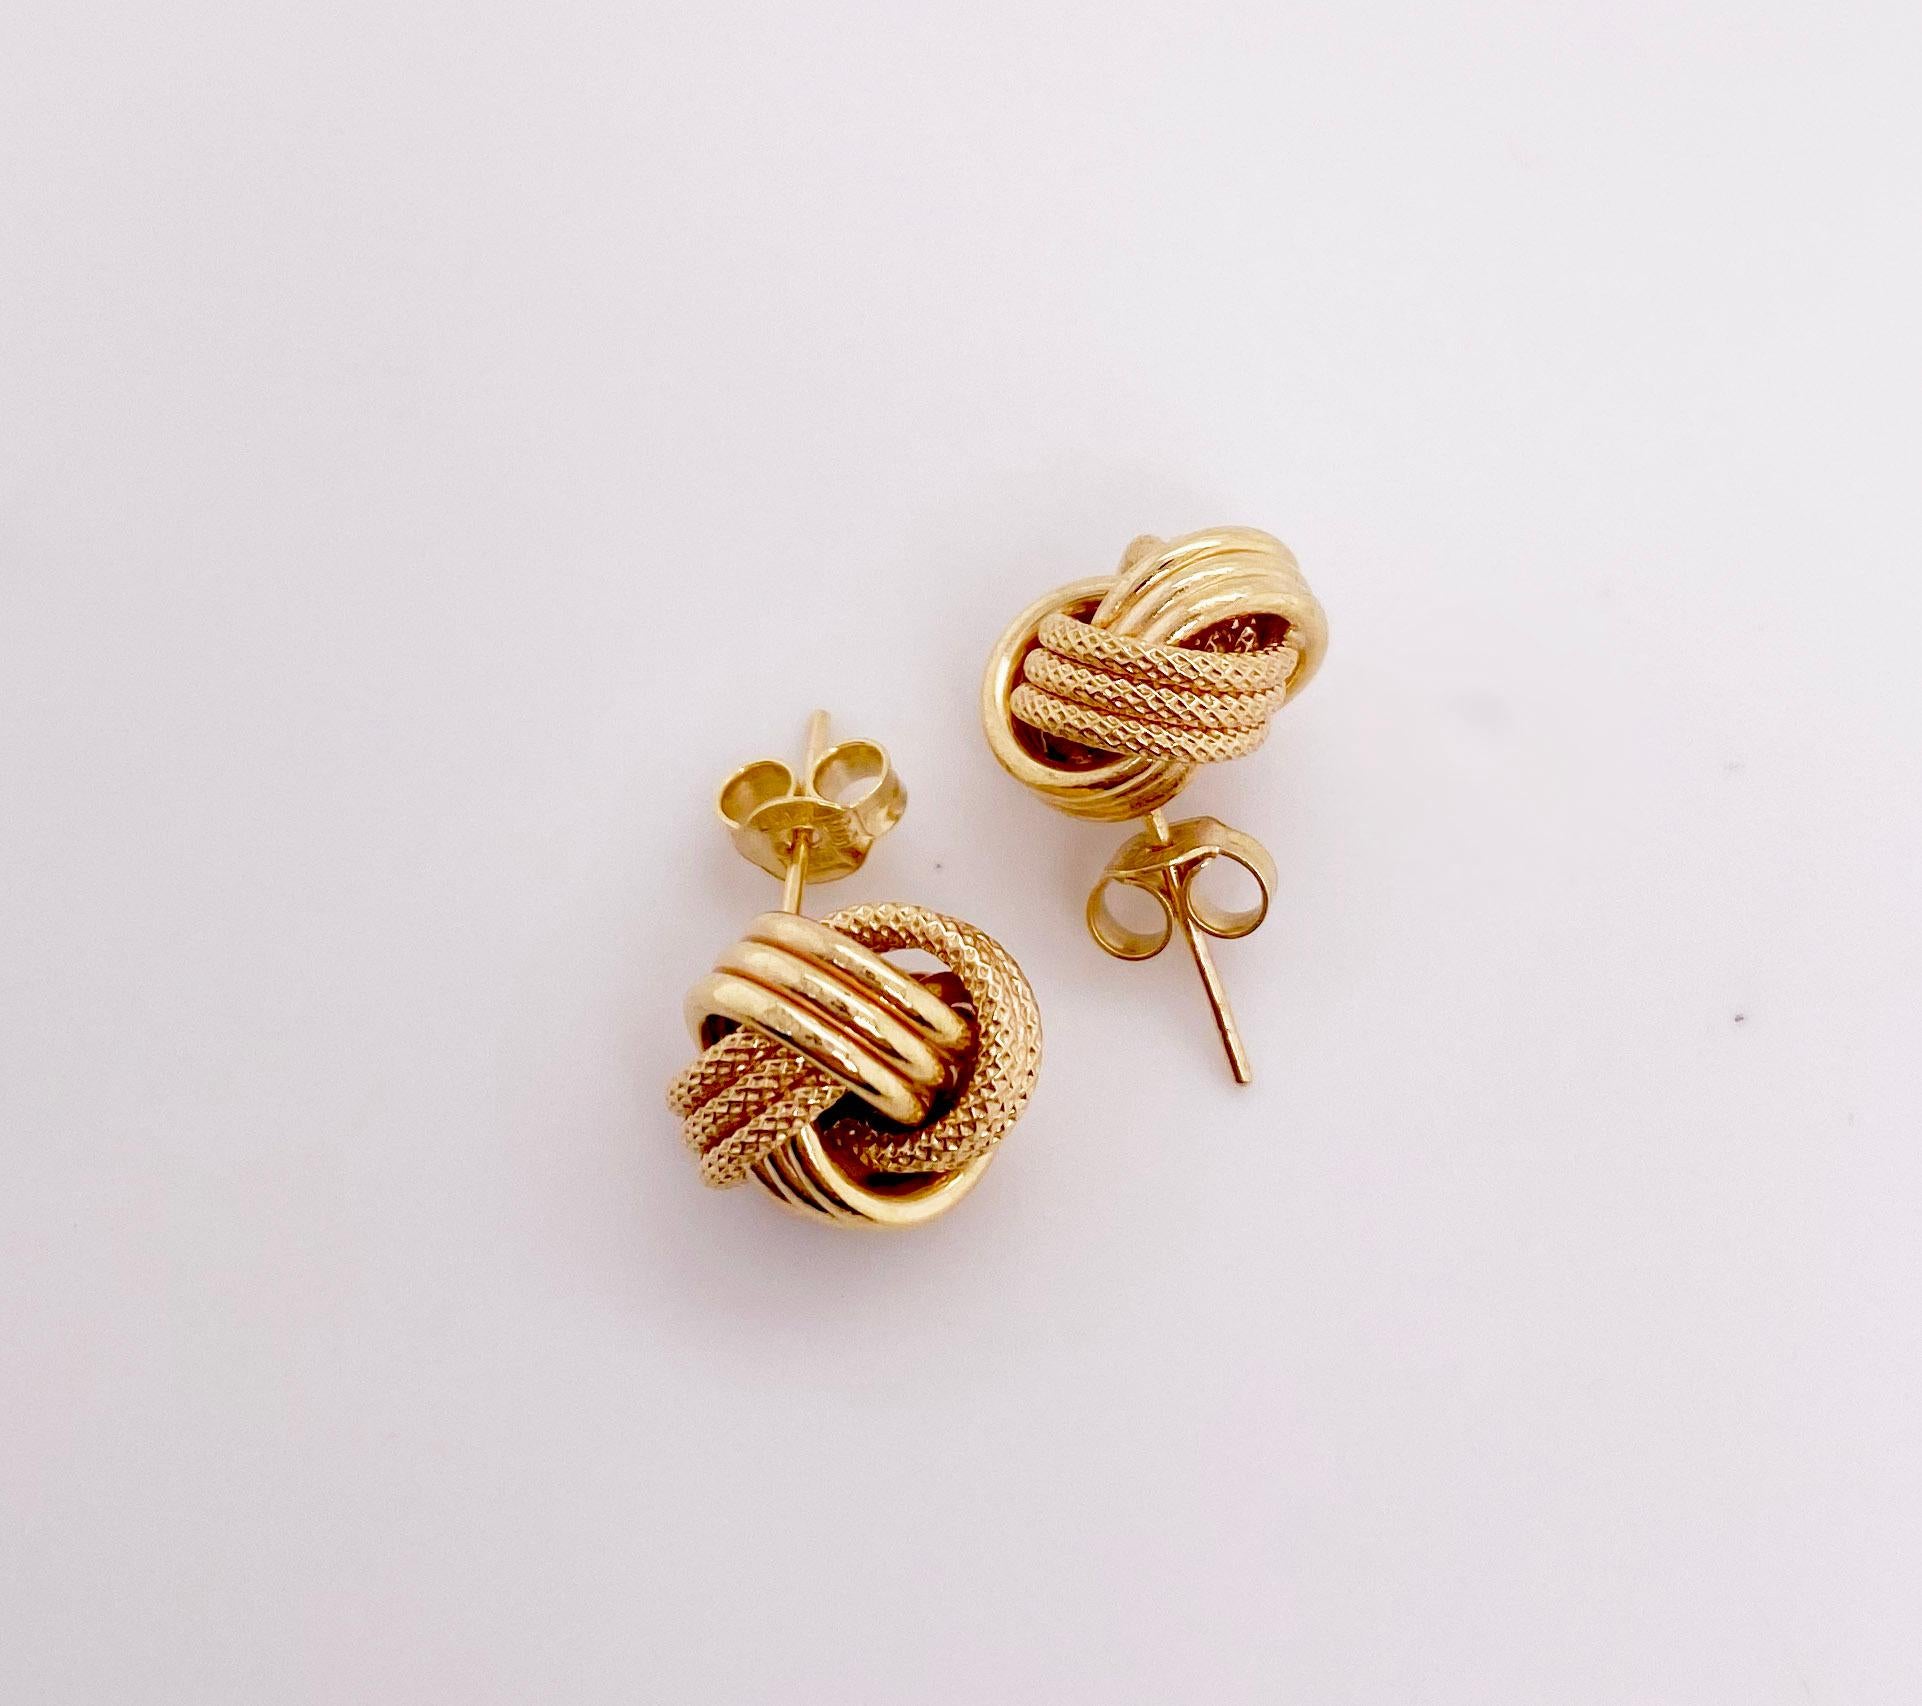 The details for these gorgeous earrings are listed below:
Metal Quality: 14 K Yellow Gold 
Earring Type: Stud 
Measurements: 11 millimeters x 11 millimeters
Post Type: Stud 
Total Gram Weight: 1.00 grams